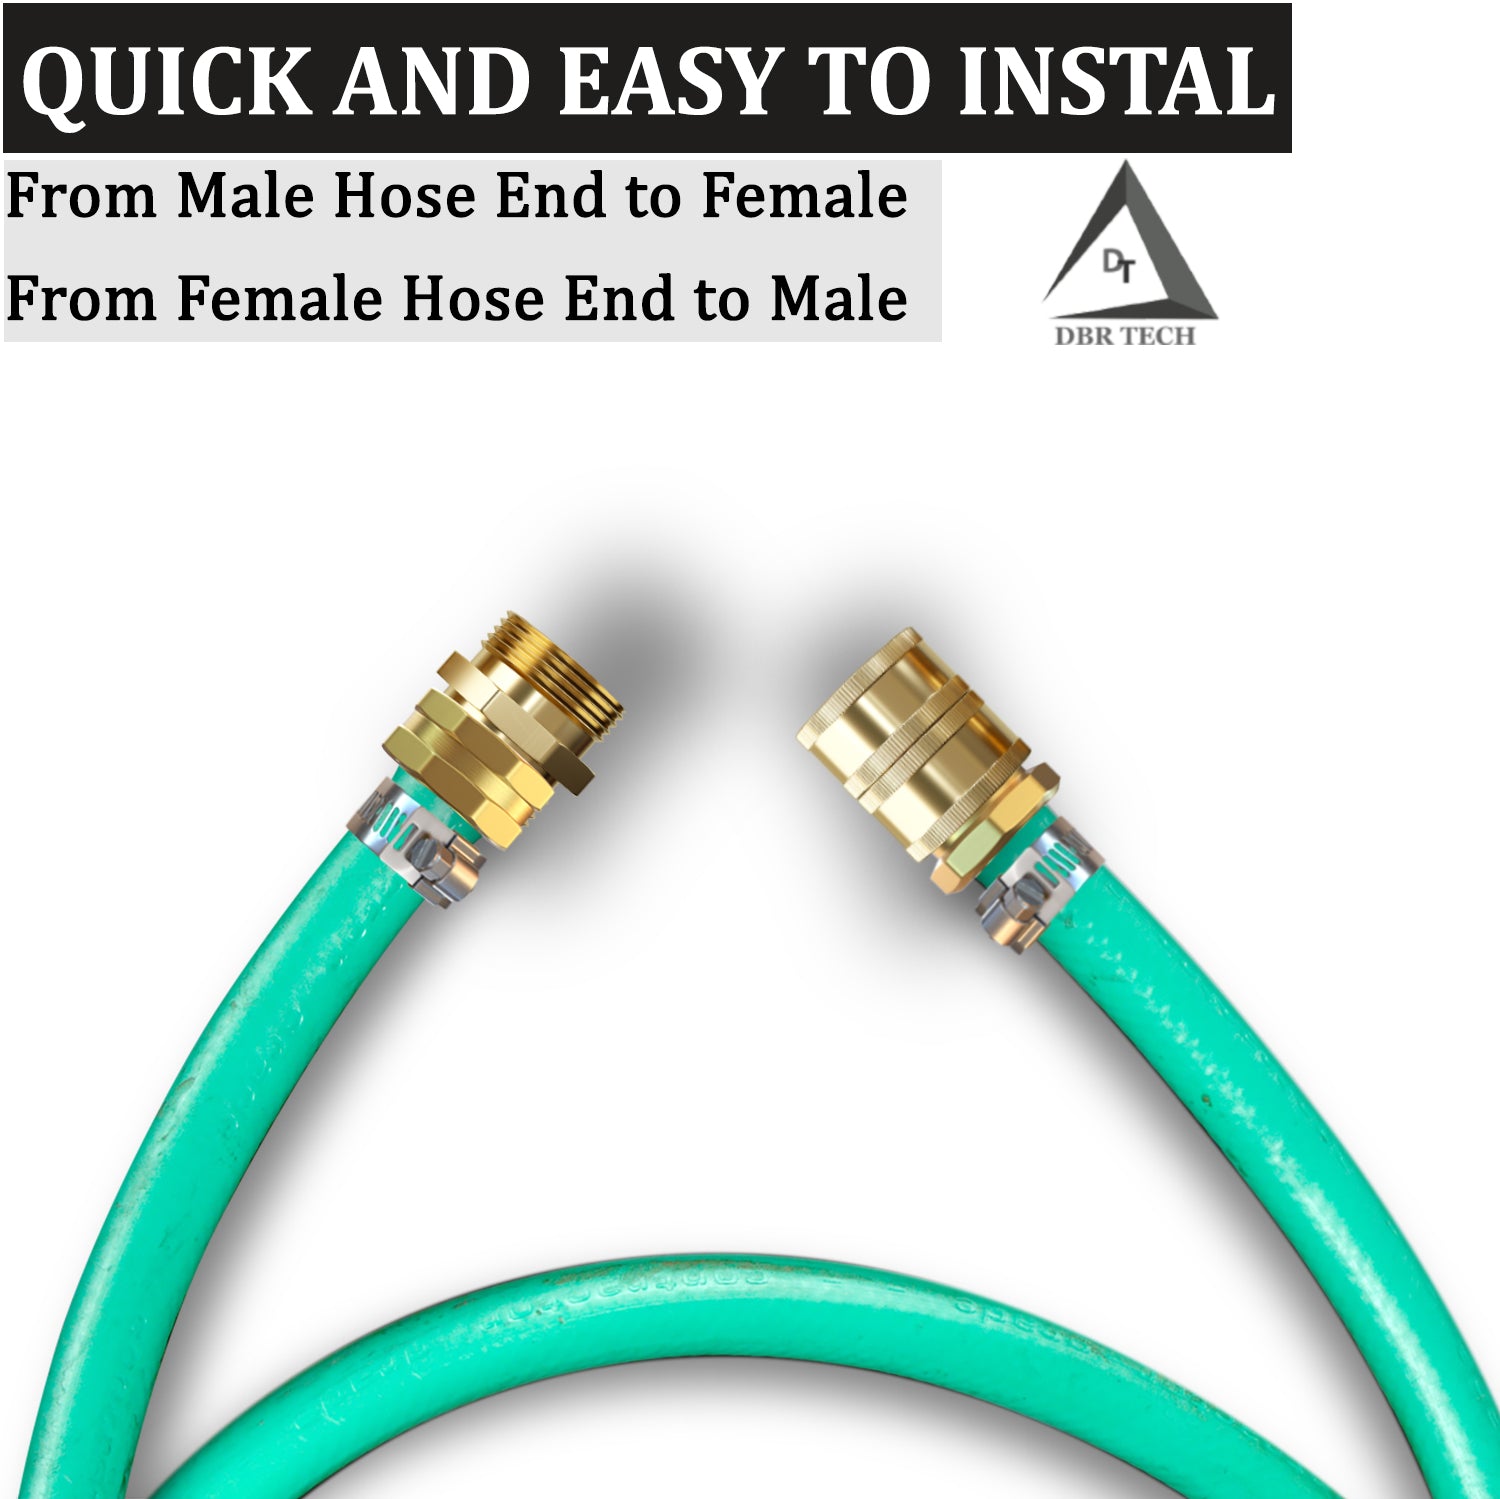 Heavy Duty Garden Hose Adapter, Male to Male and Female to Female